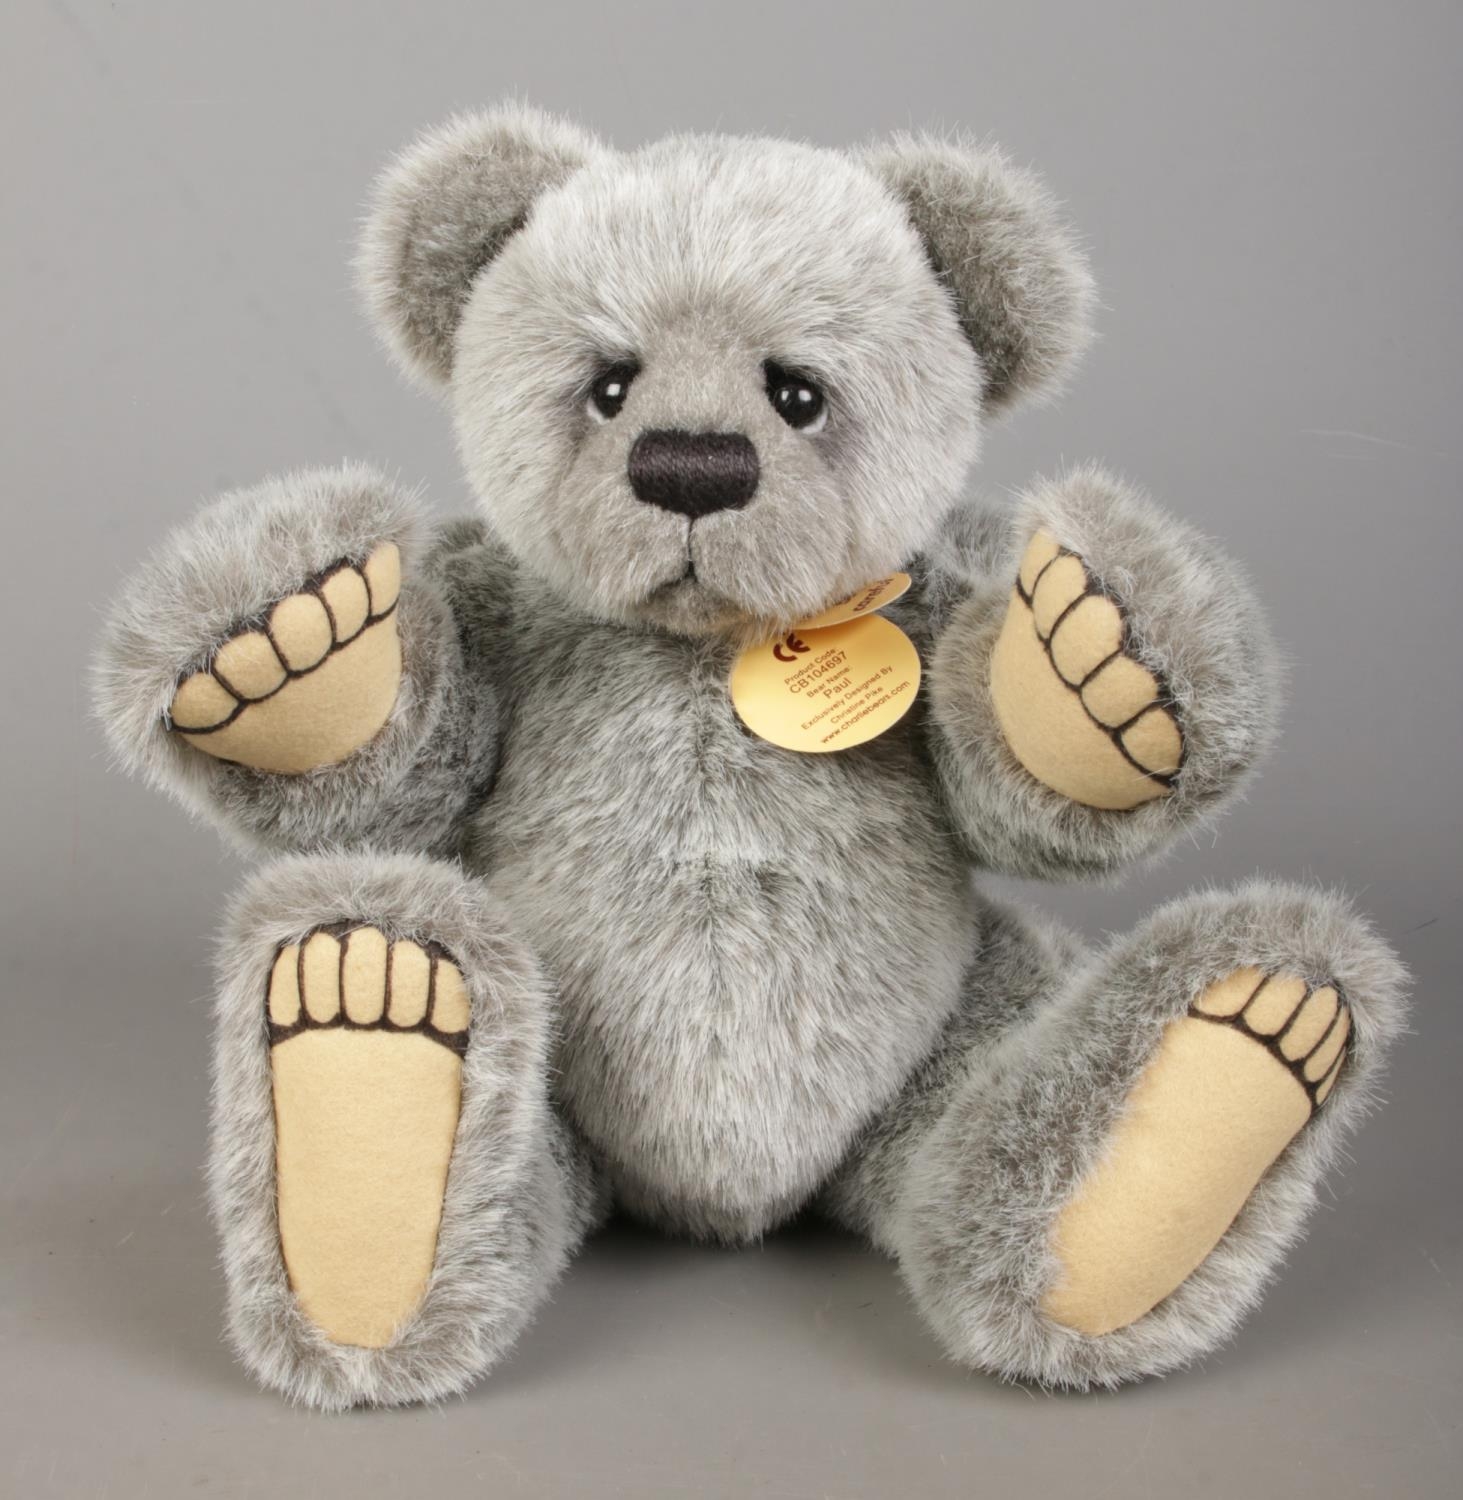 A Charlie Bears jointed teddy bear, Paul. Exclusively designed by Christine Pike. With bell and